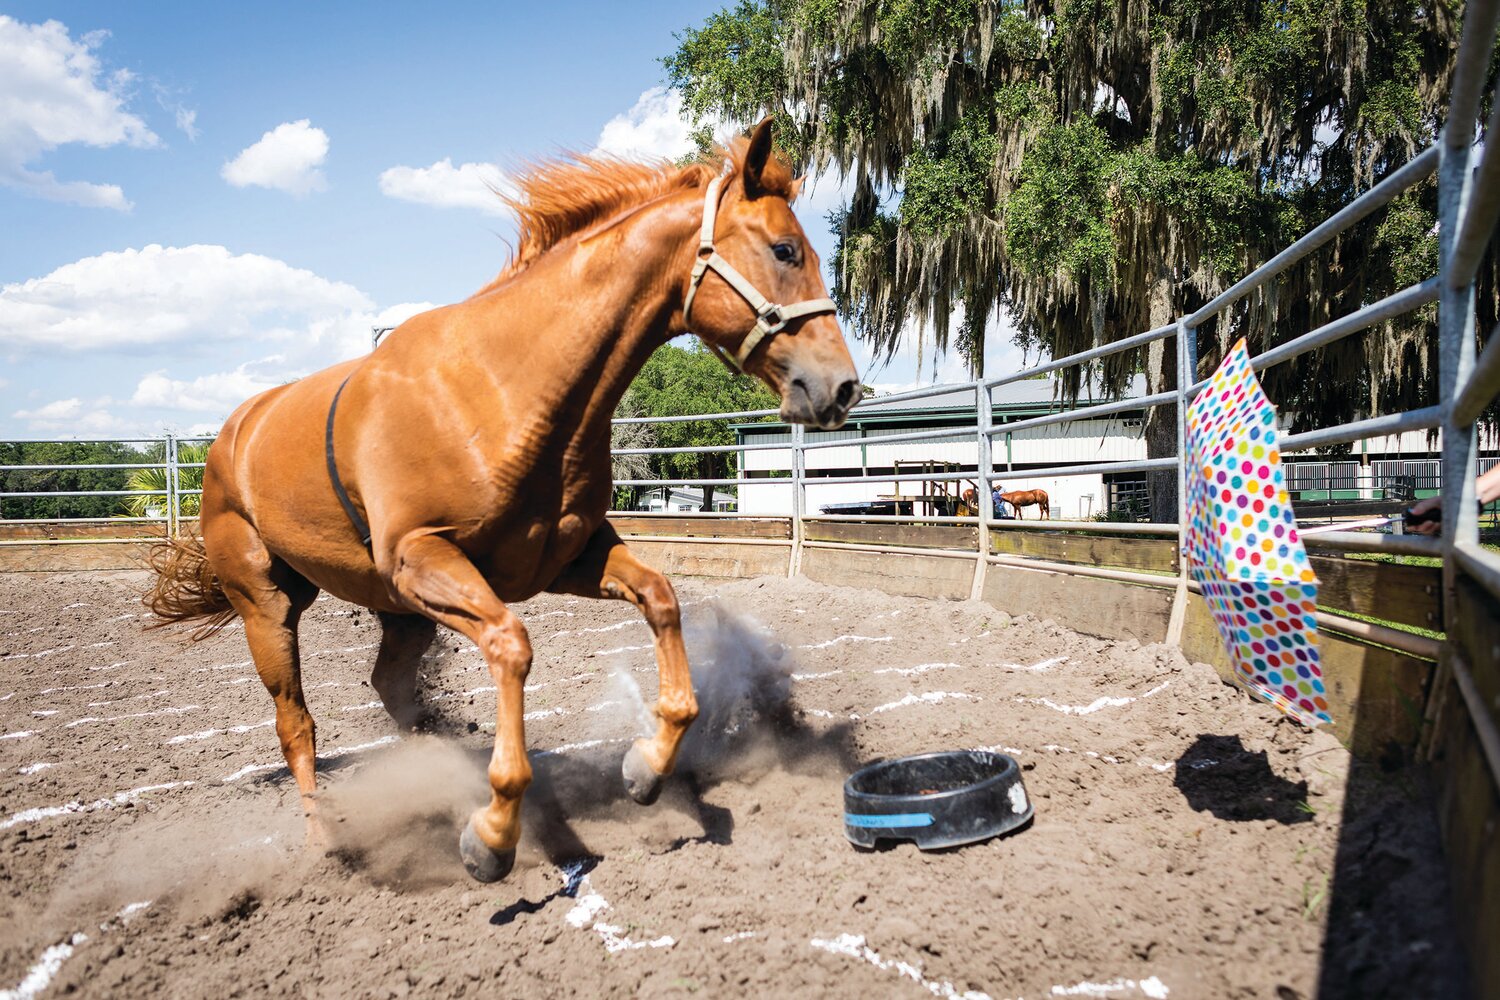 University of Florida researchers are working to identify genes that influence horses’ tendency to react when startled.